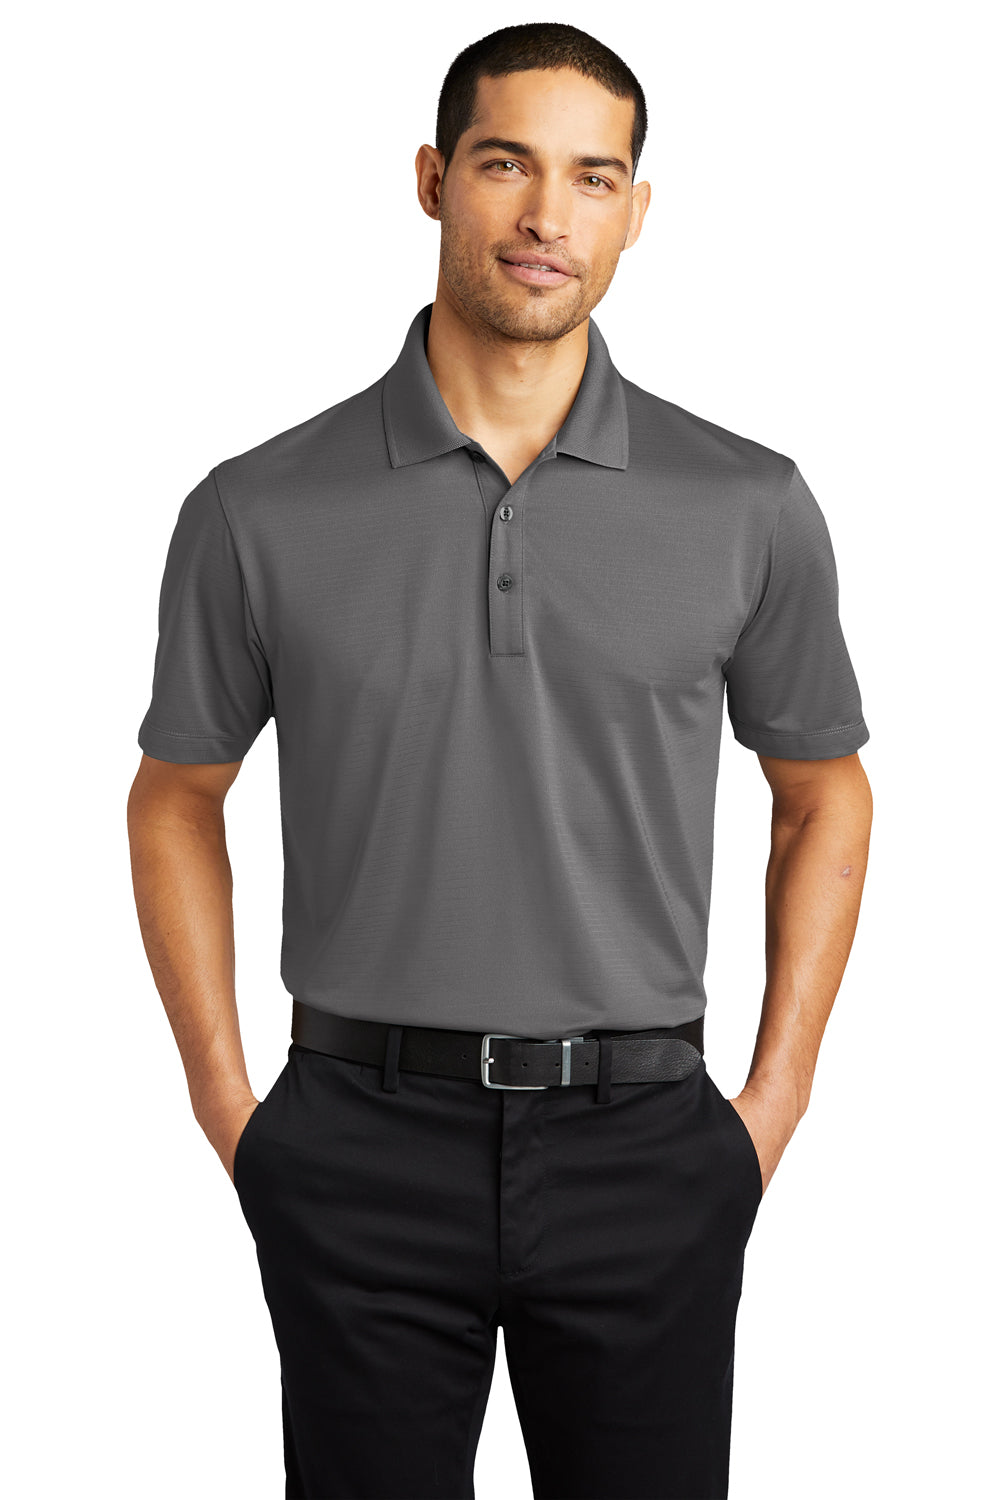 Port Authority Mens Eclipse Stretch Short Sleeve Polo Shirt Shadow Grey Front